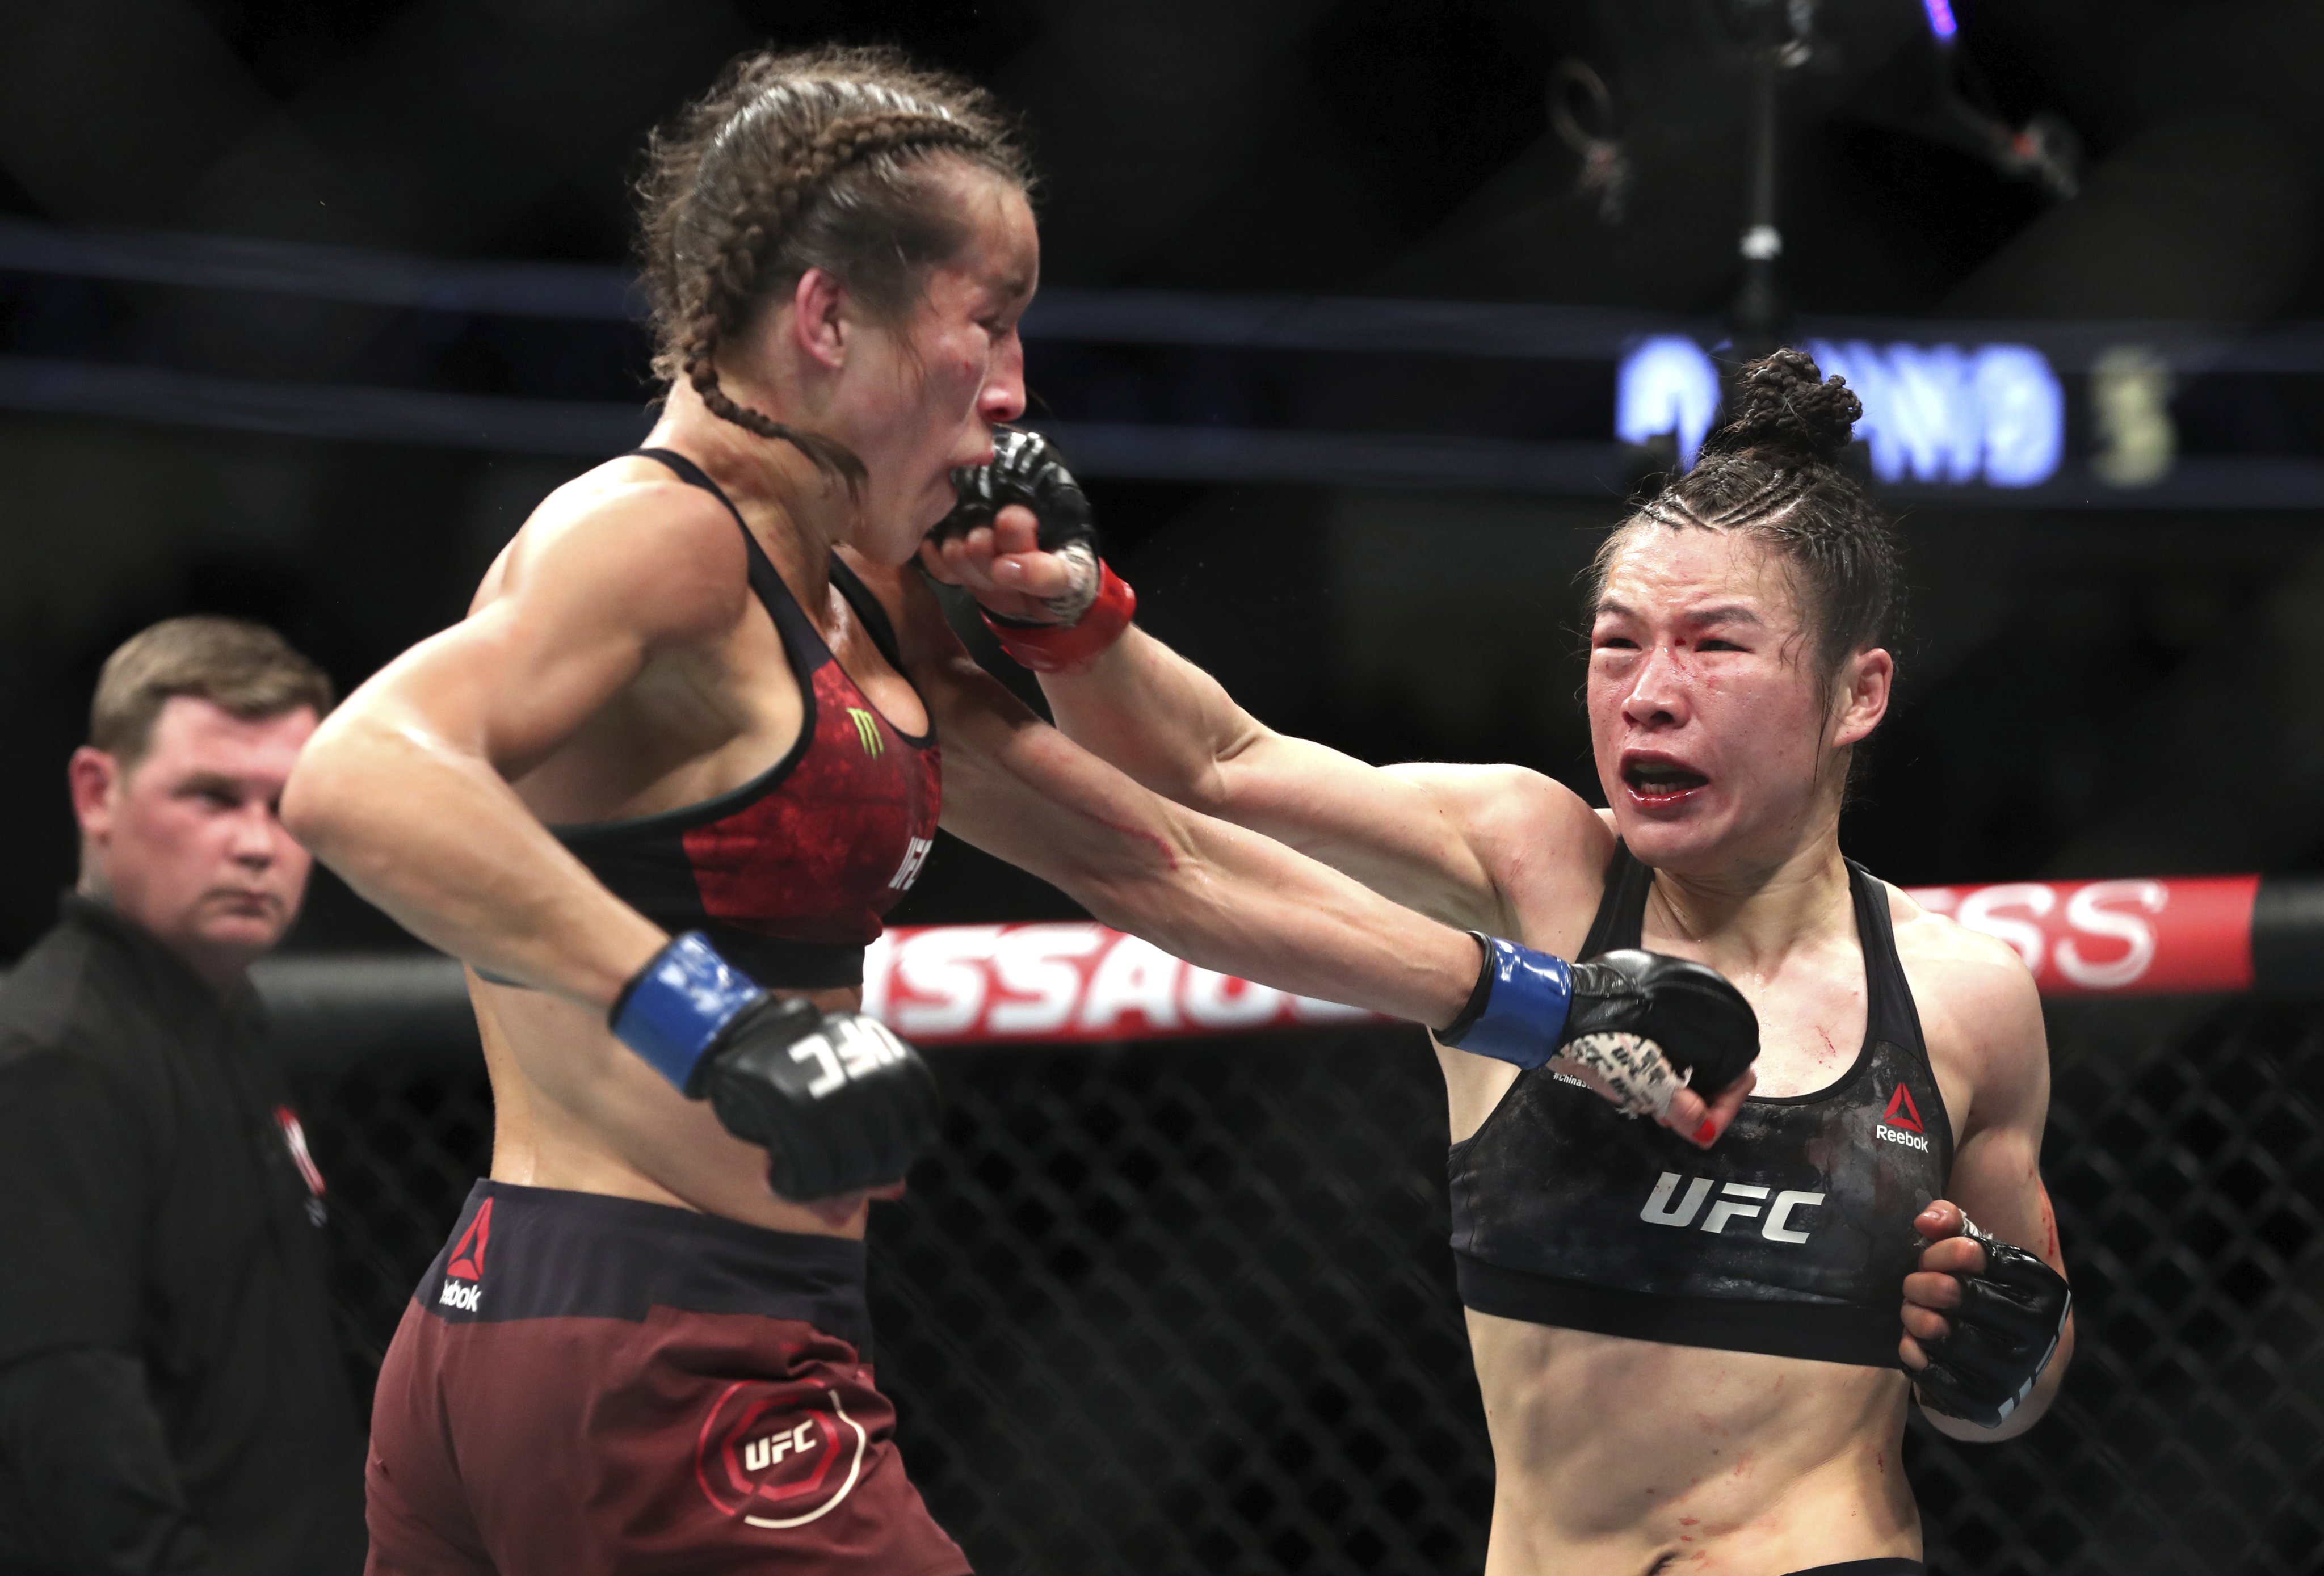 Zhang Weili punches Joanna Jedrzejczyk during UFC 248 at T-Mobile Arena in Las Vegas. Photos: Steve Marcus/Las Vegas Sun via AP